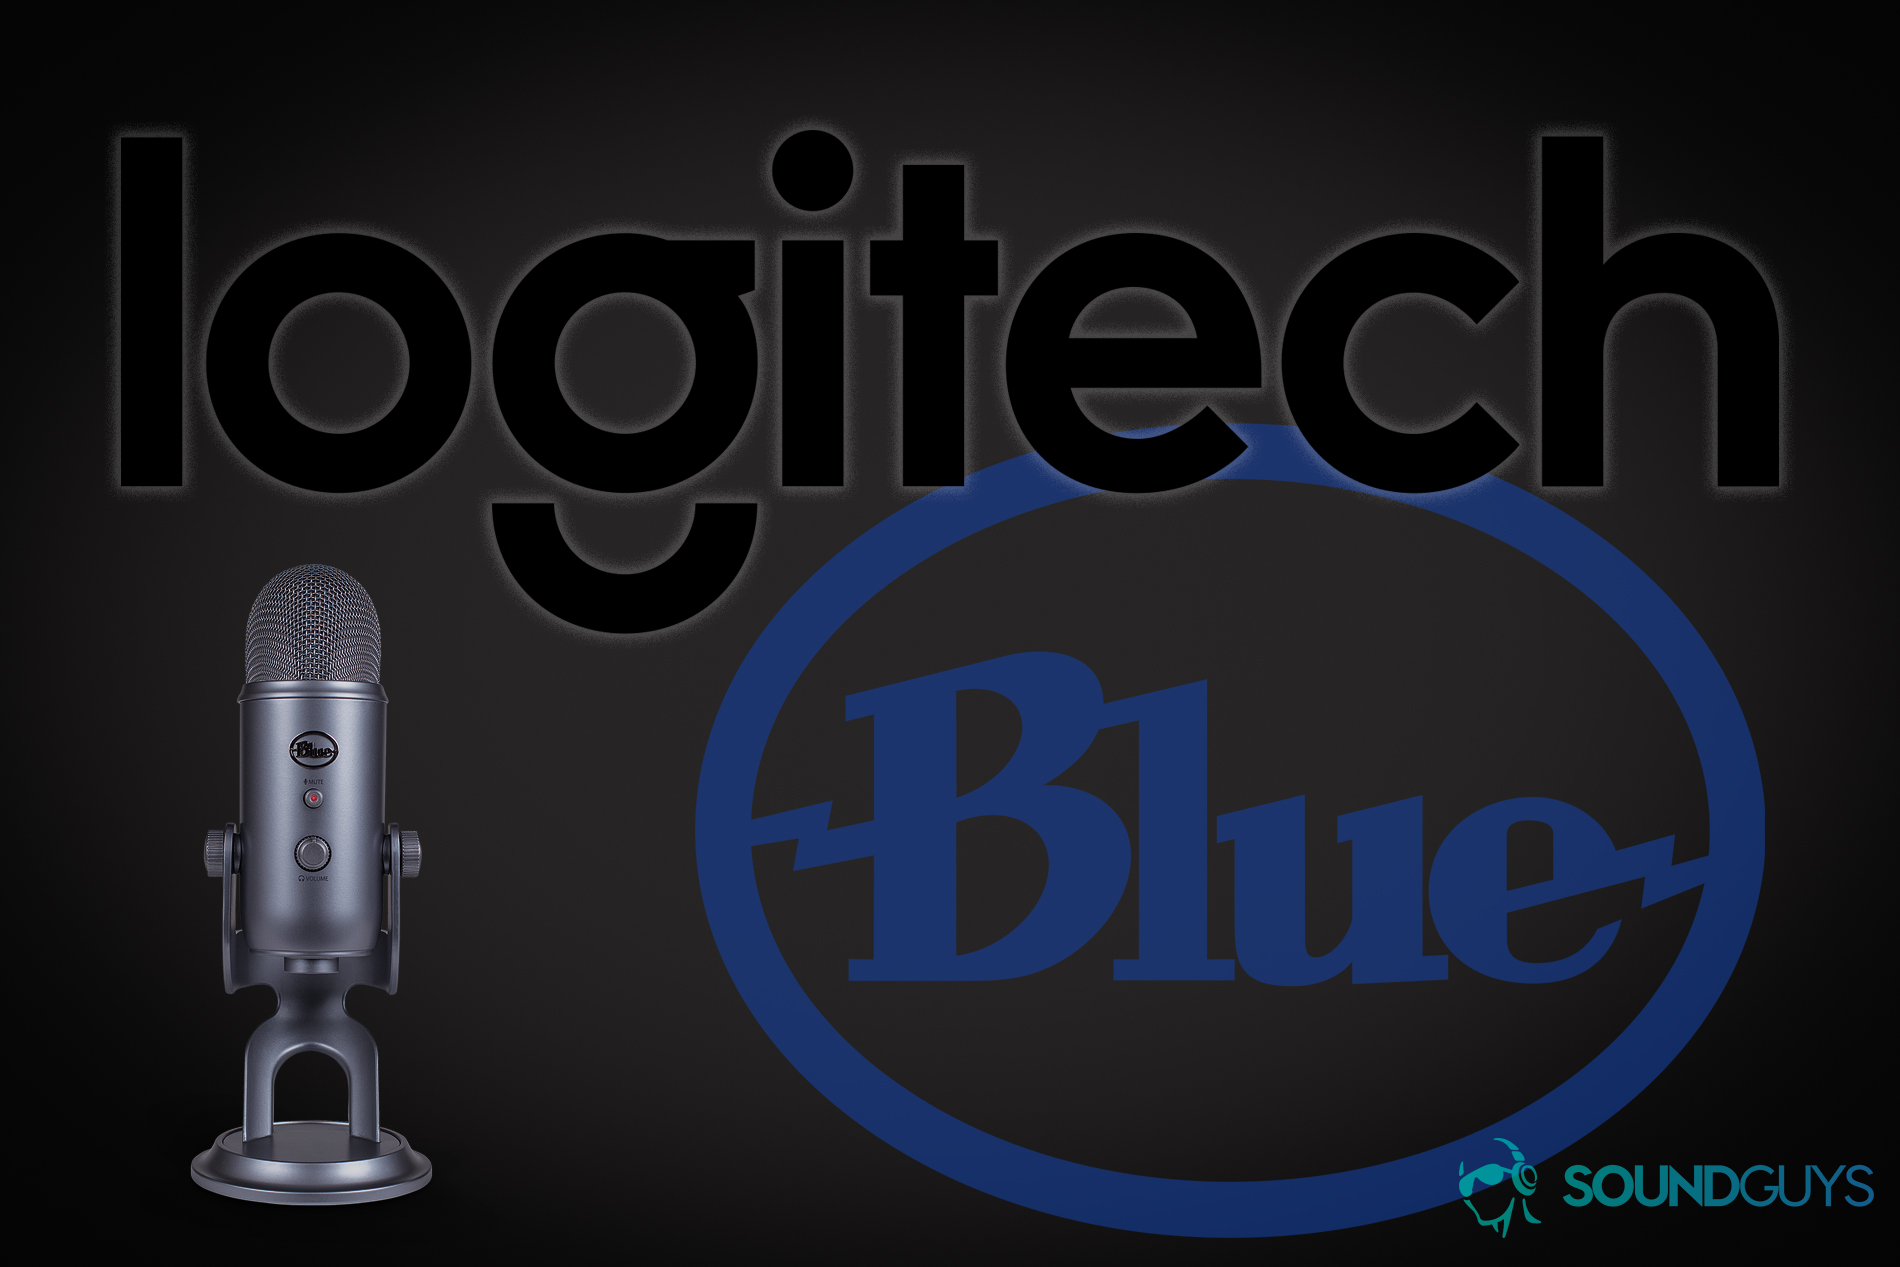 An image showing the logos of Logitech and Blue Microphones, flanked by the Blue Yeti microphone.